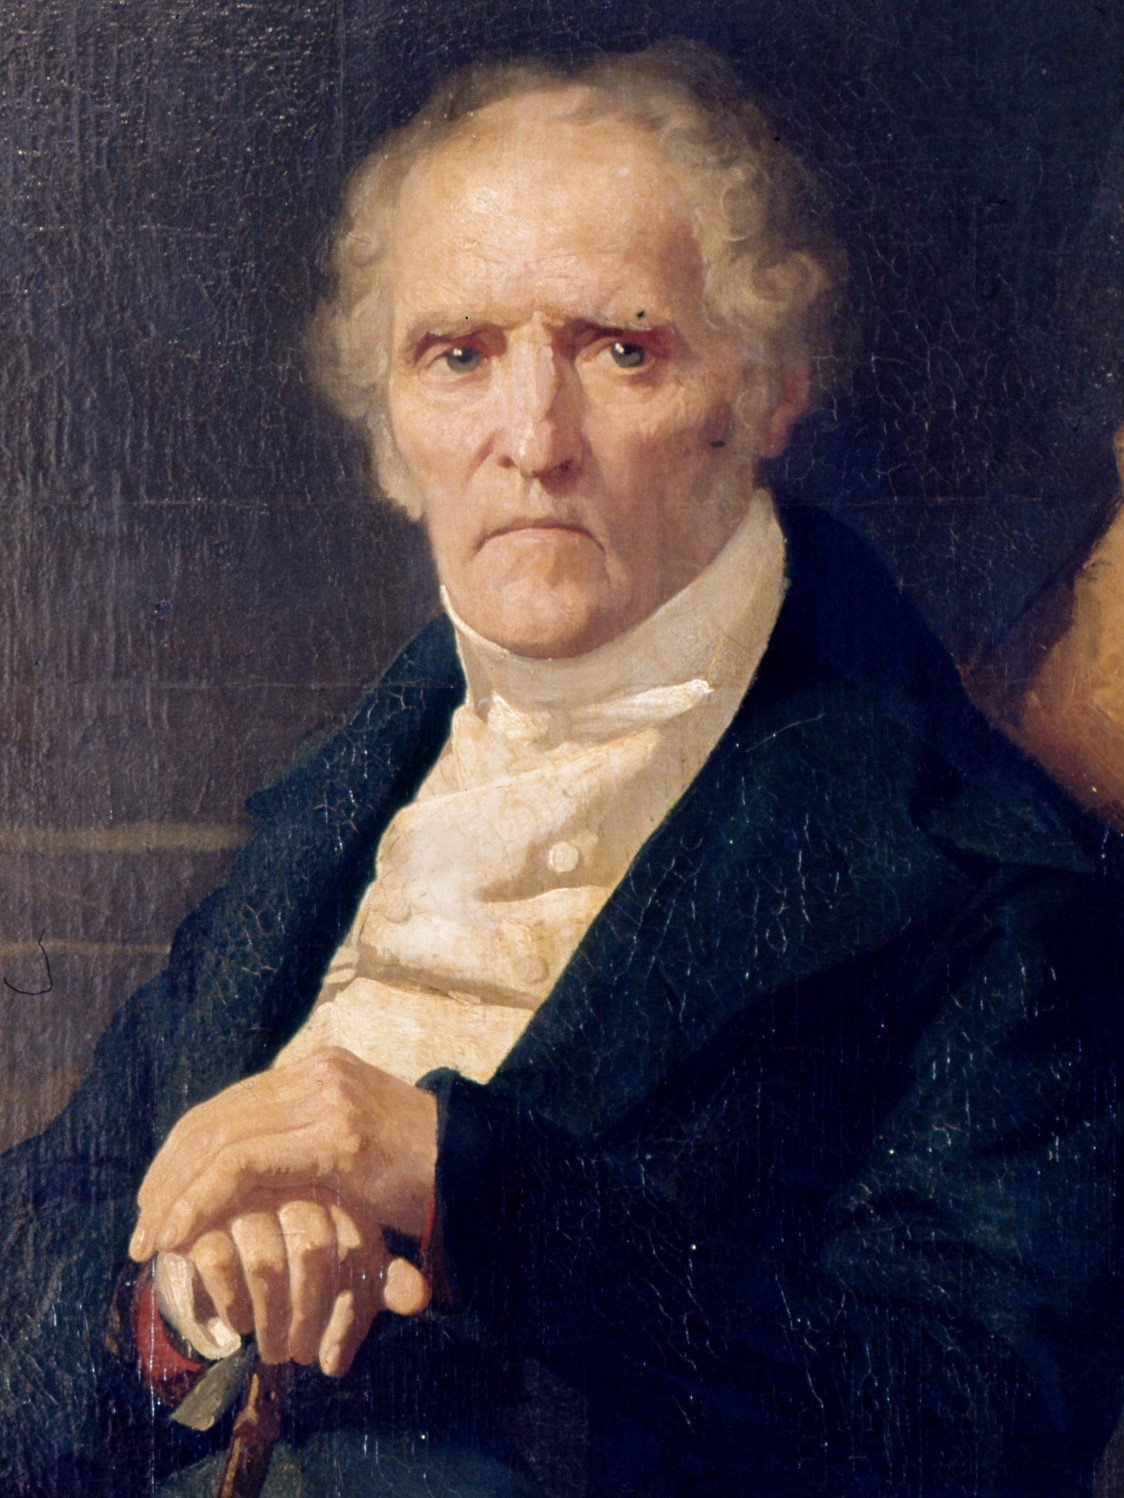 File:Charles Fourier.png